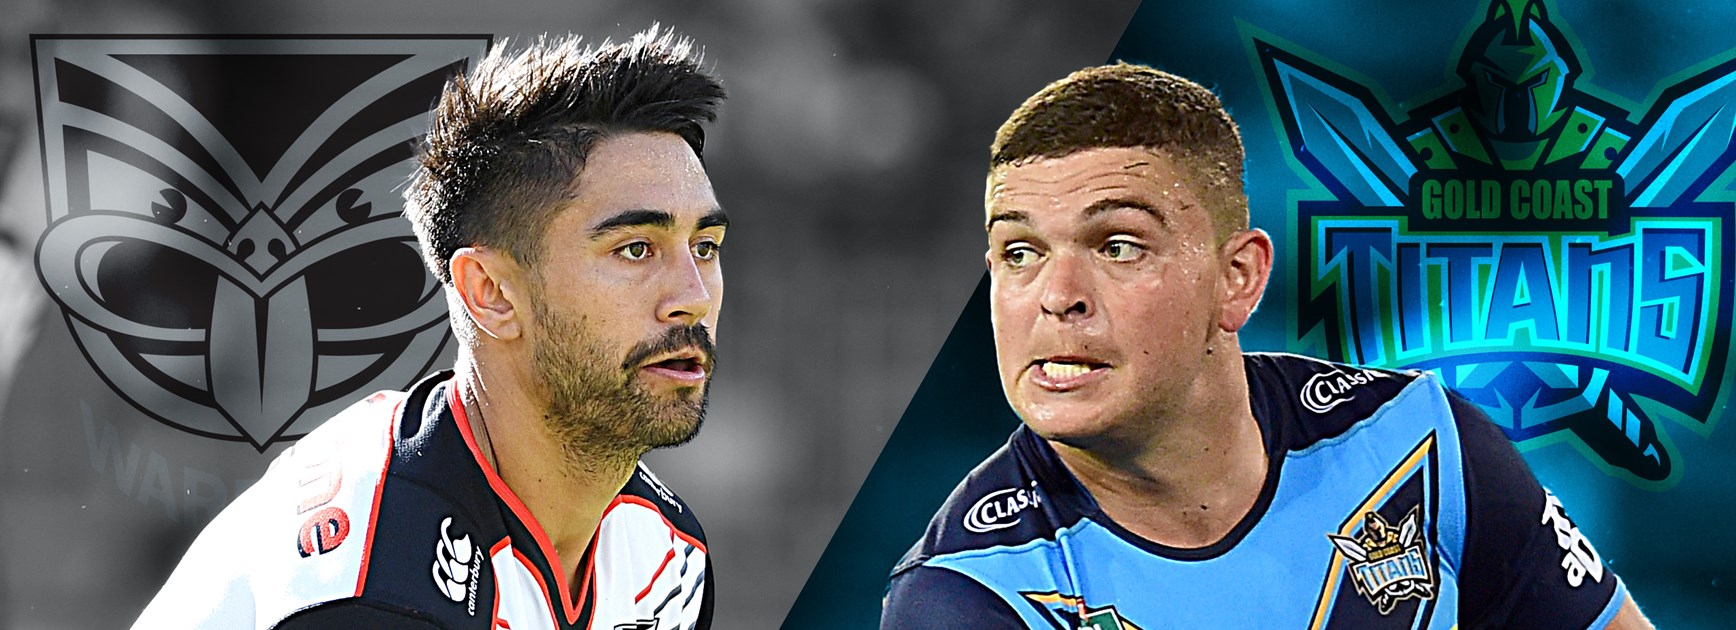 Warriors v Titans: Surprise round one winners face off